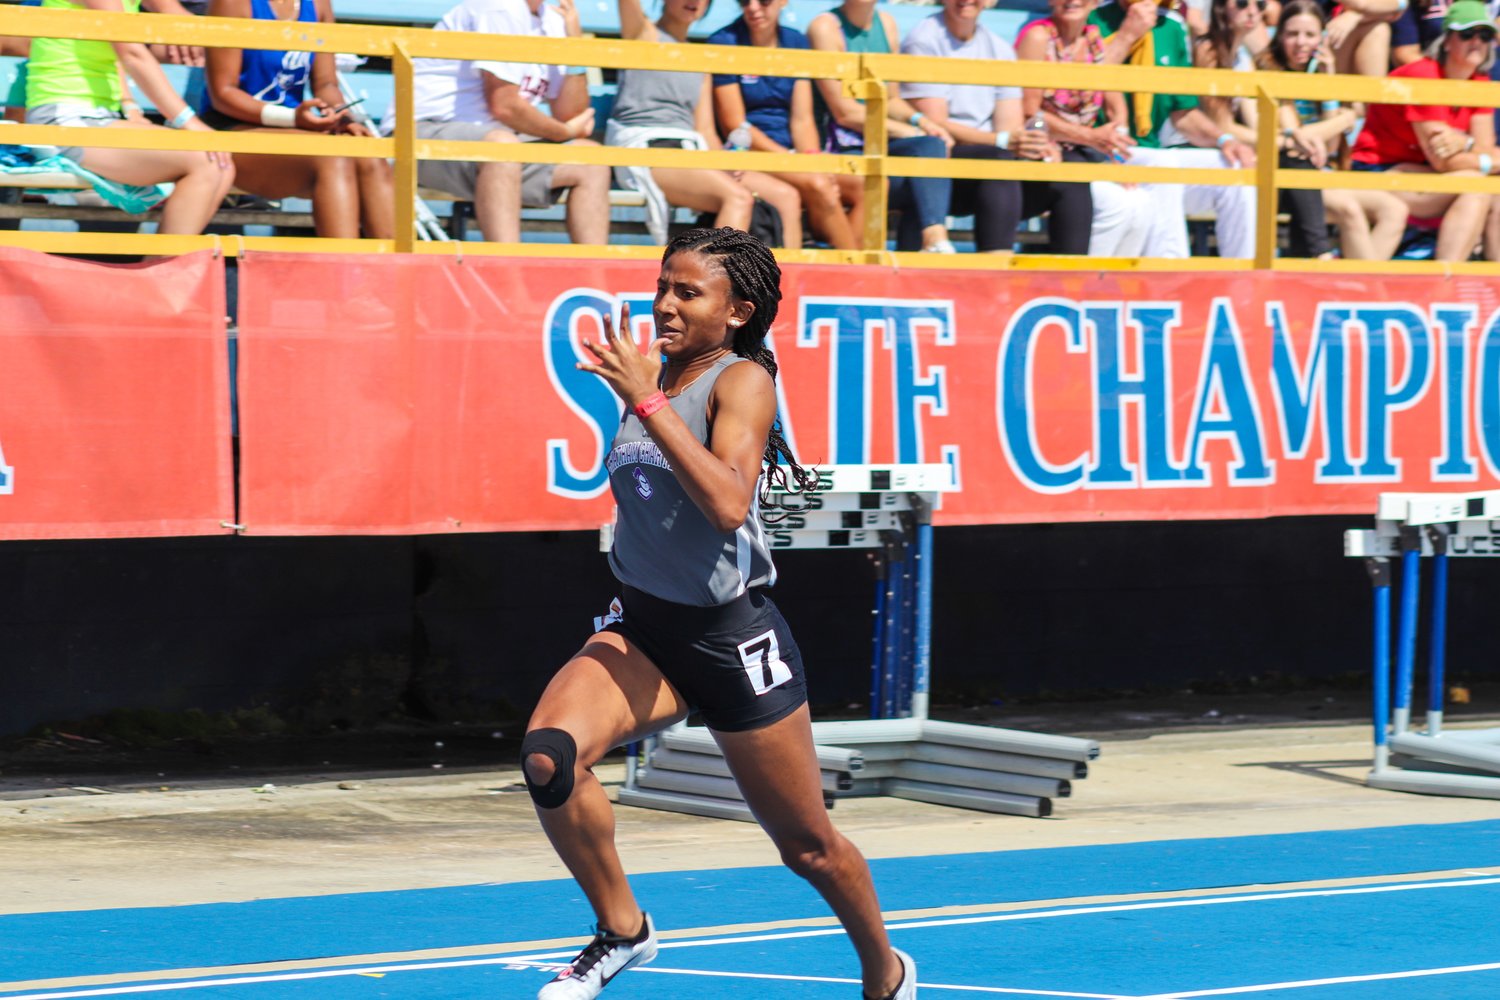 Chatham Charter sophomore Tamaya Walden hustles to the finish line in one of her three short-distance races at the 1A NCHSAA Track & Field State Championships at North Carolina A&T State University in Greensboro last Friday. Walden was one of two Knights that qualified for three or more events (Brooke Garner), placing 13th in the girls 100-meter dash (13.44), 9th in the girls 200-meter dash (26.96) and 9th in the girls 400-meter dash (1:02.60).